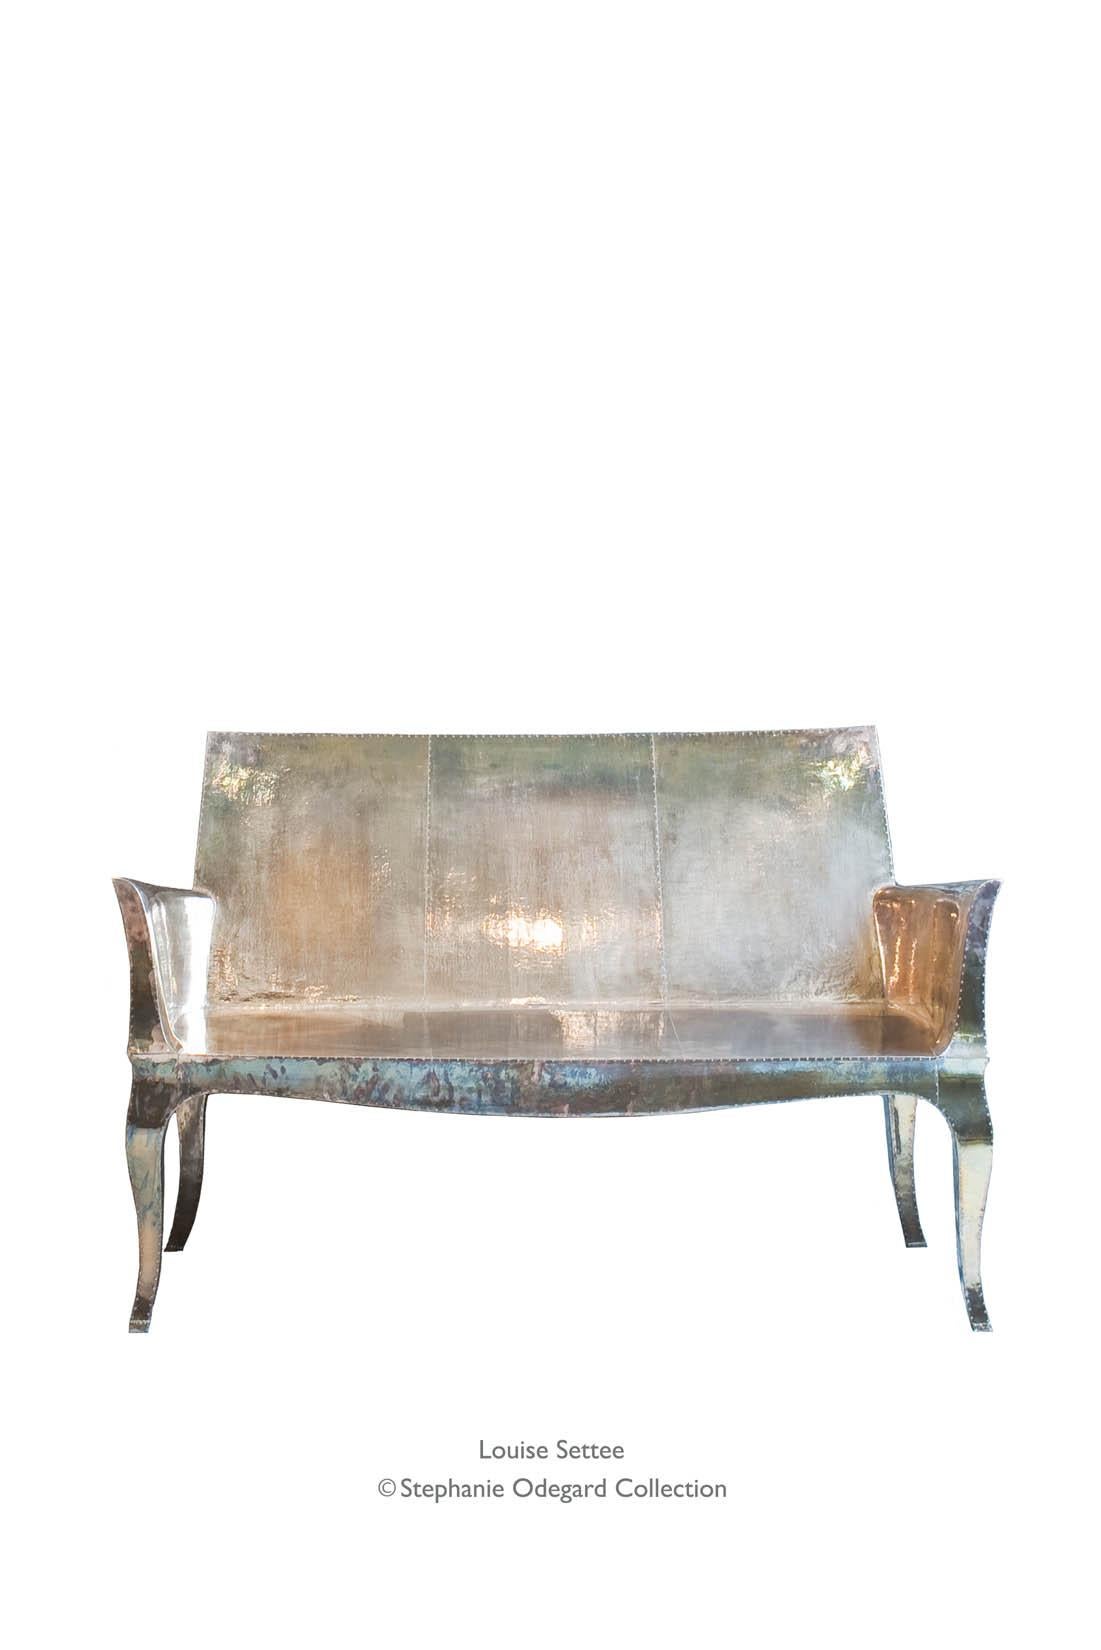 Louise Settee Art Deco Benches in Smooth Copper by Paul Mathieu for S Odegard For Sale 7